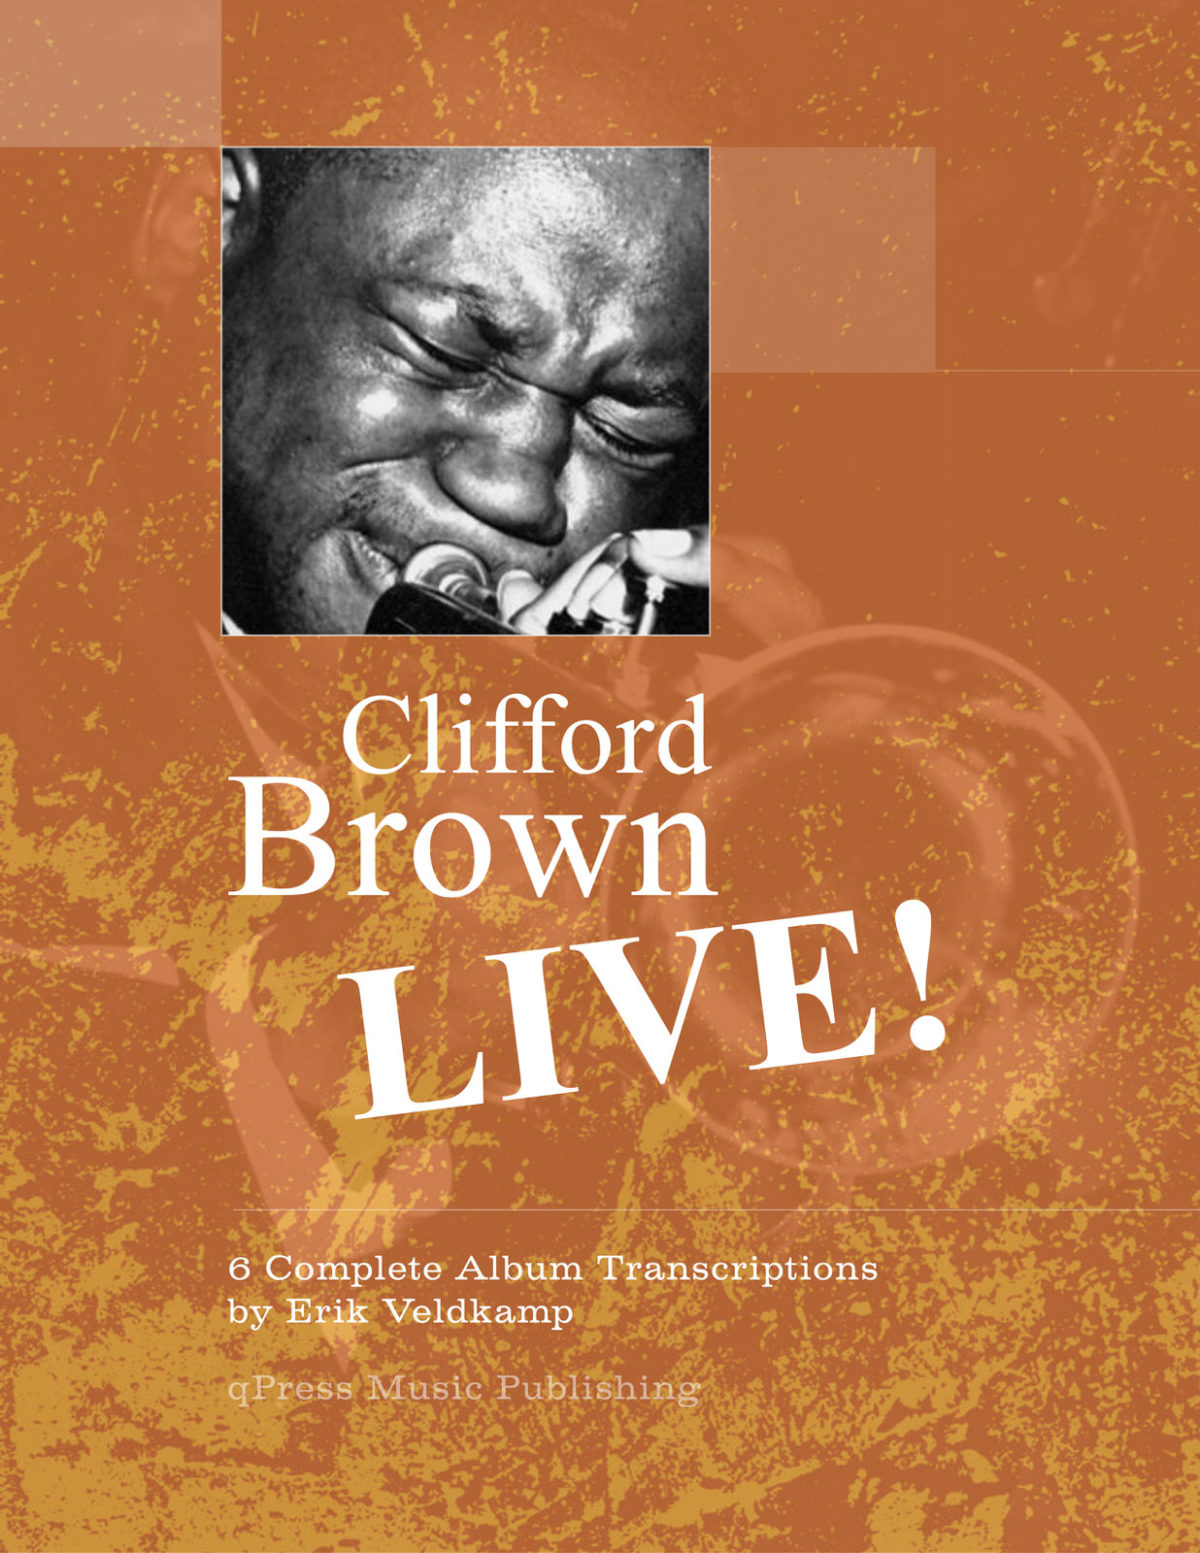 Clifford brown live-p1